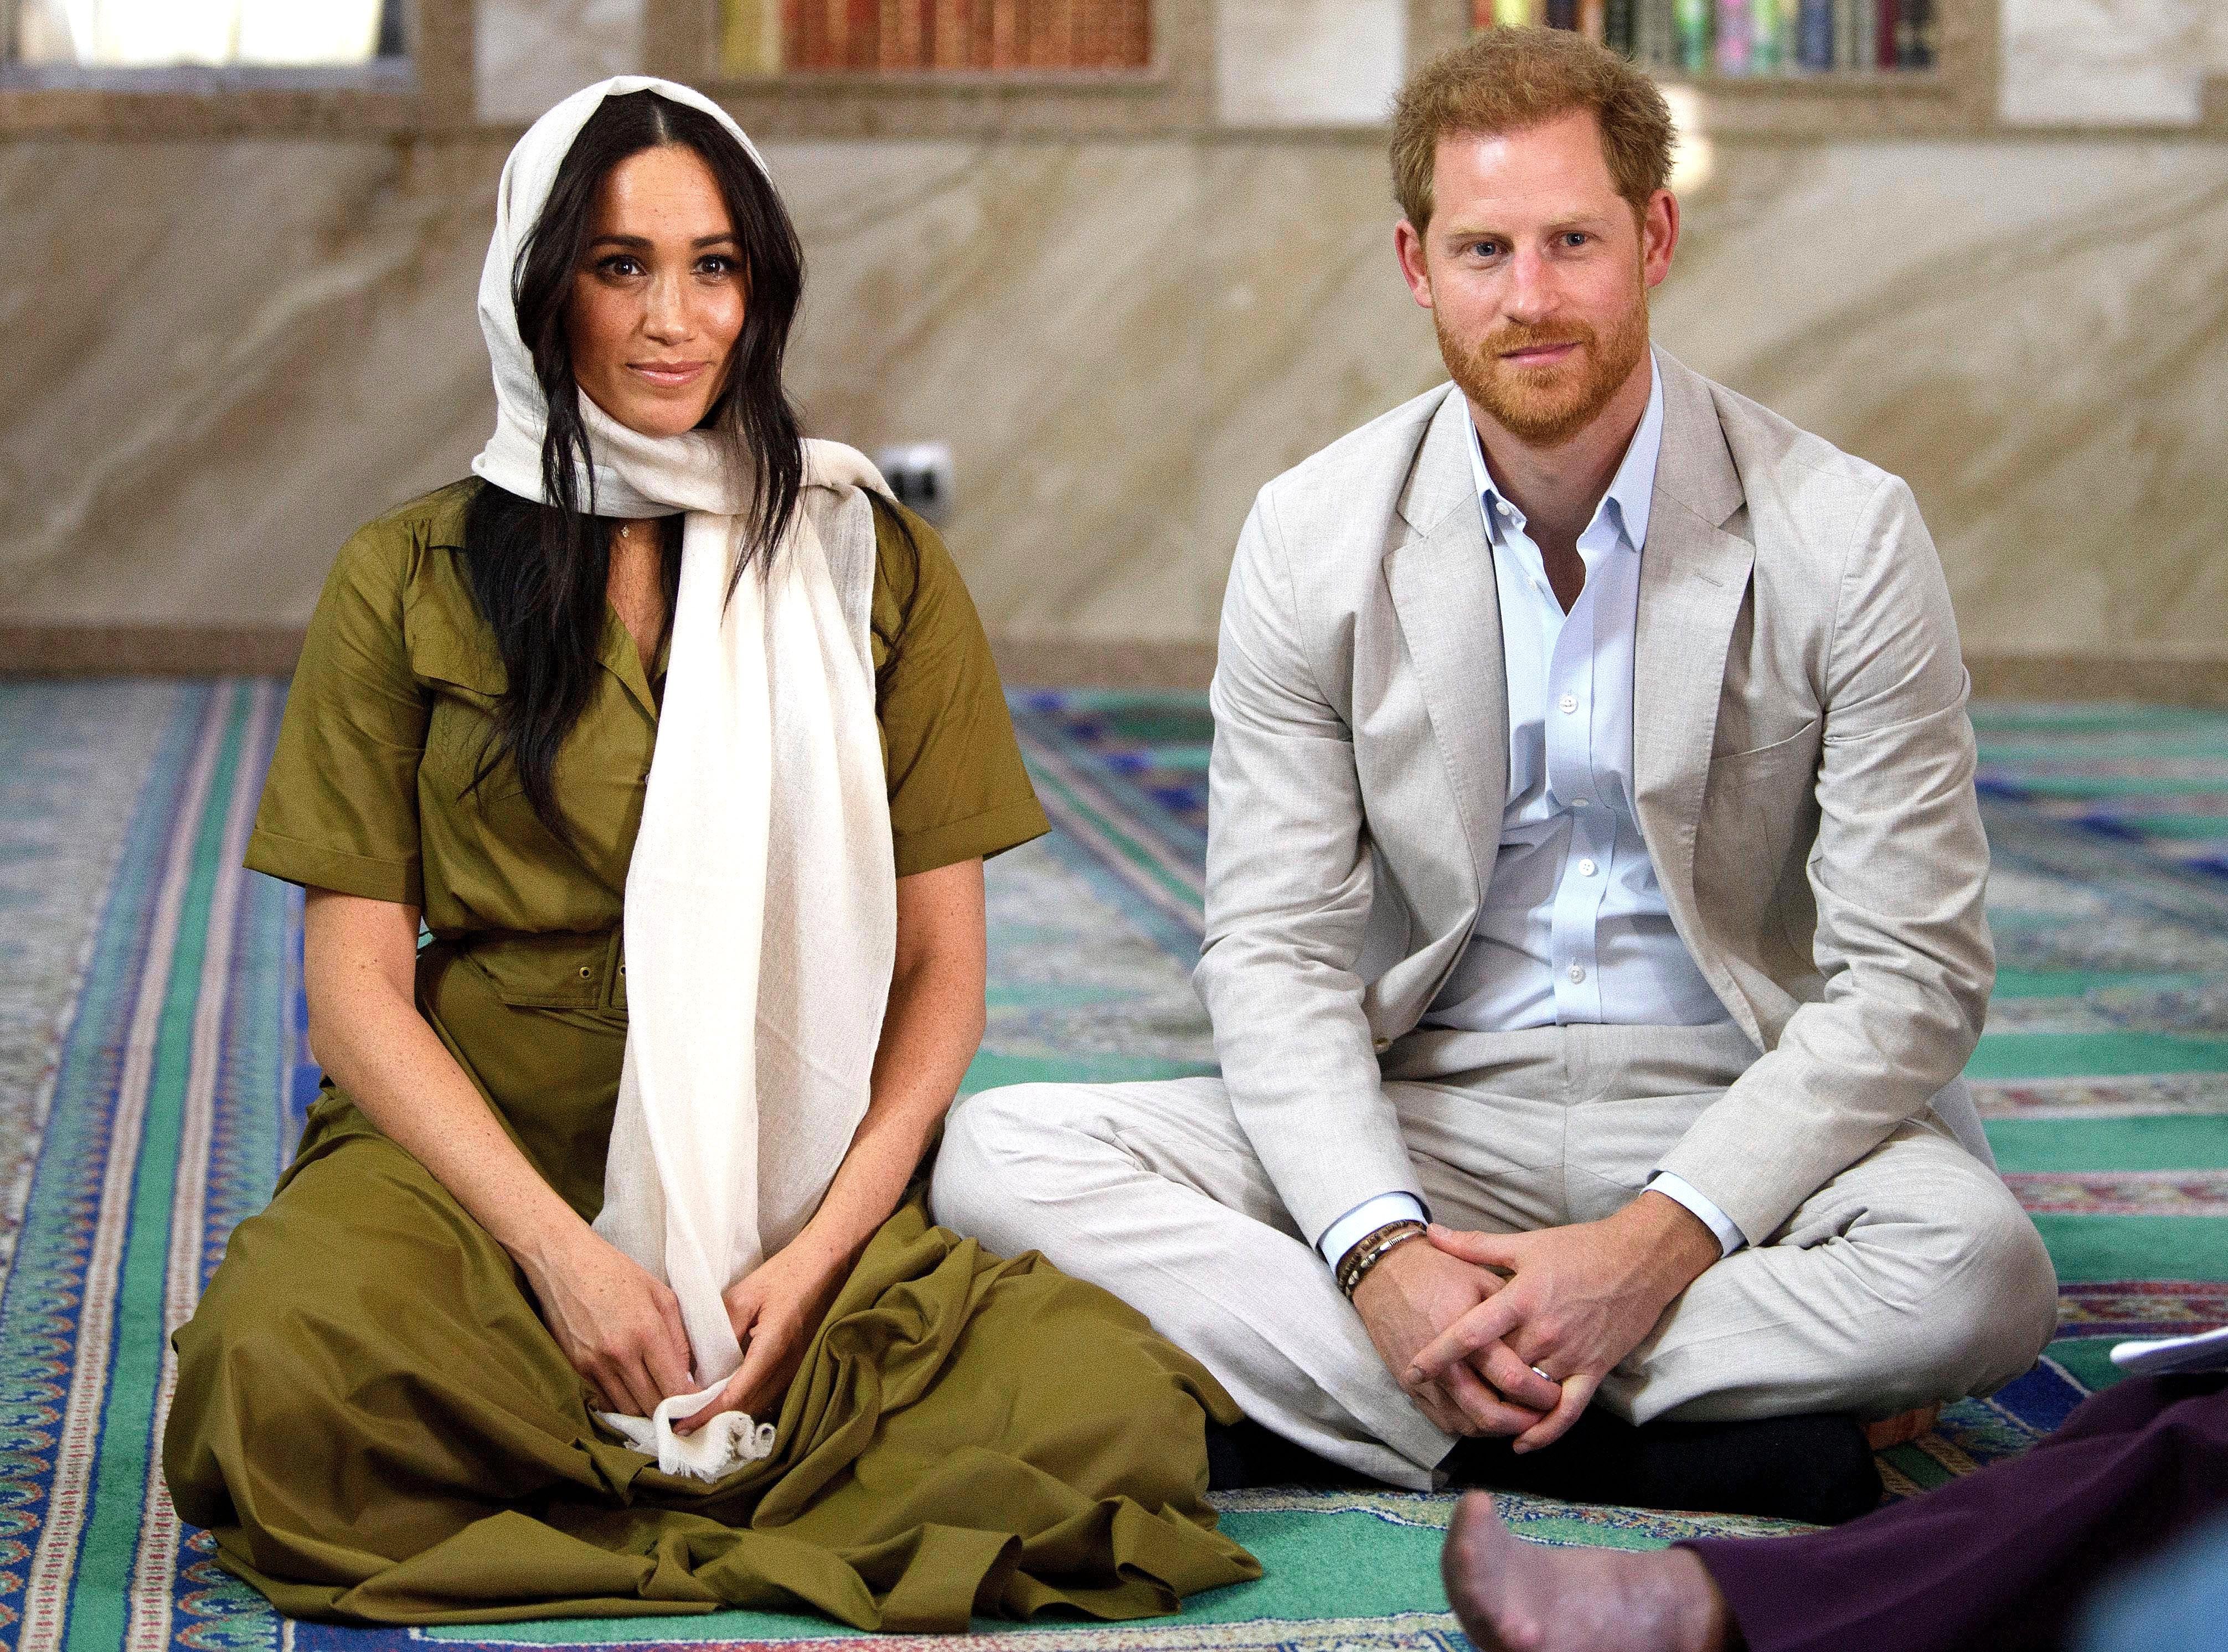 Meghan Markle and Prince Harry during their royal tour of South Africa on September 24, 2019, in Cape Town, South Africa. | Source: Getty Images.